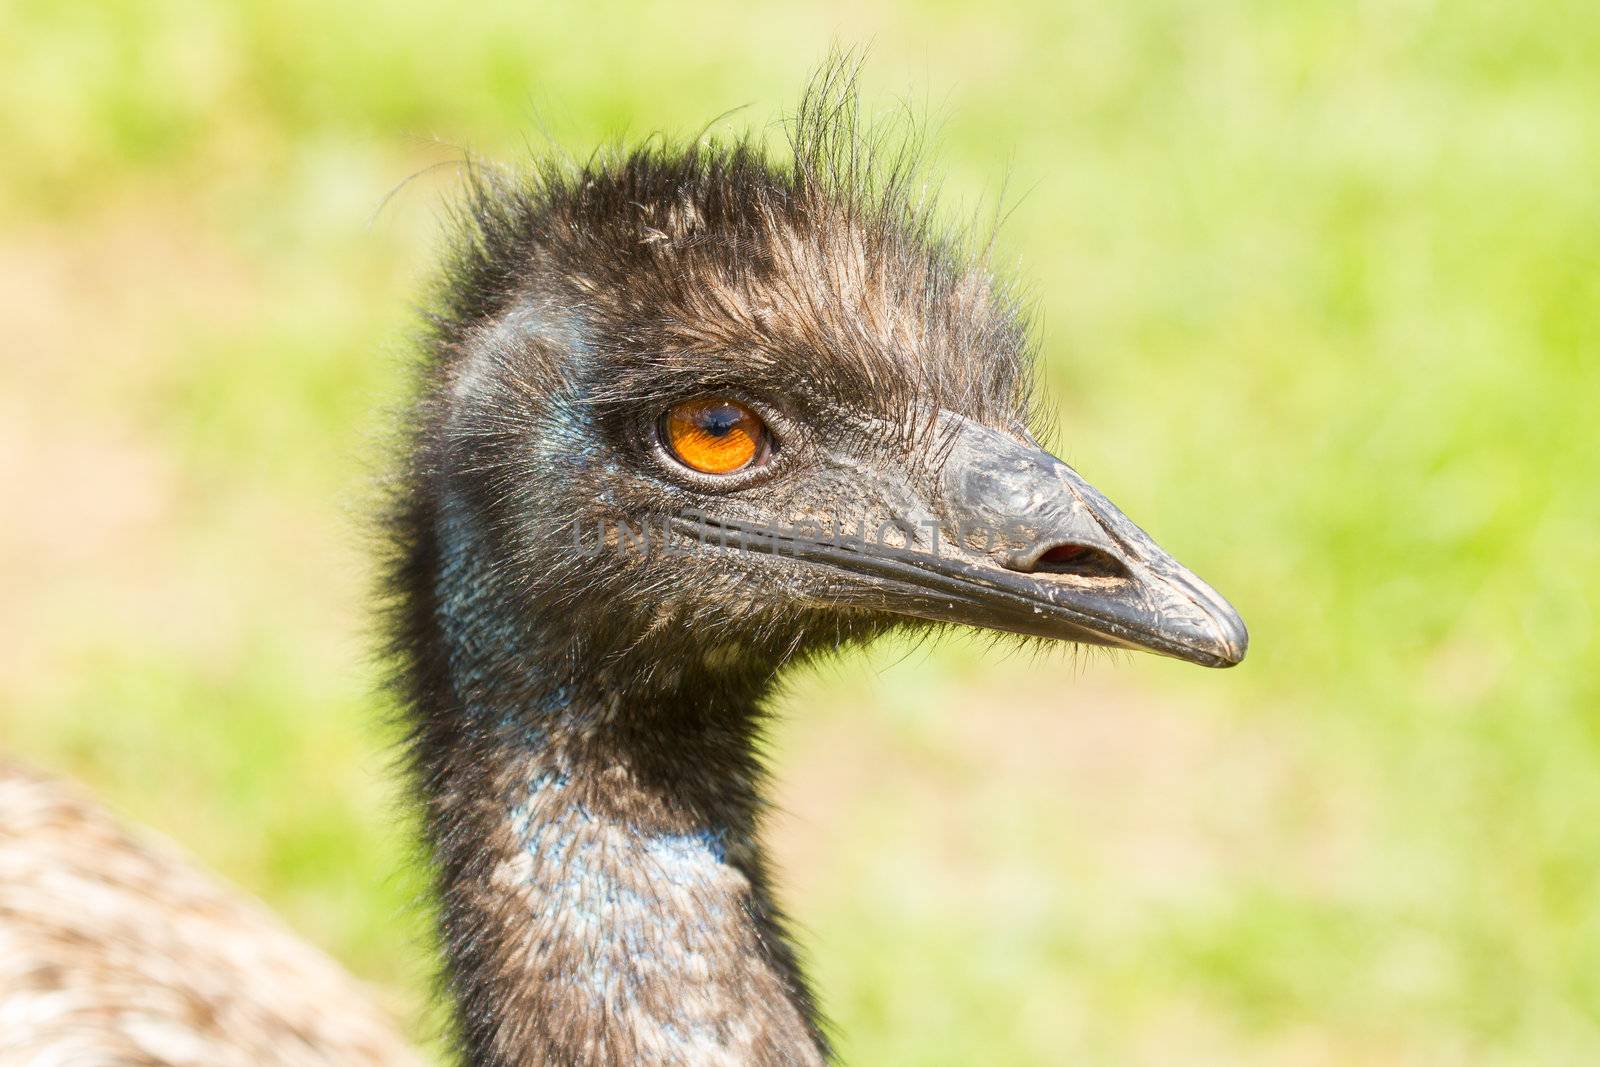 A close-up of an emu  by michaklootwijk